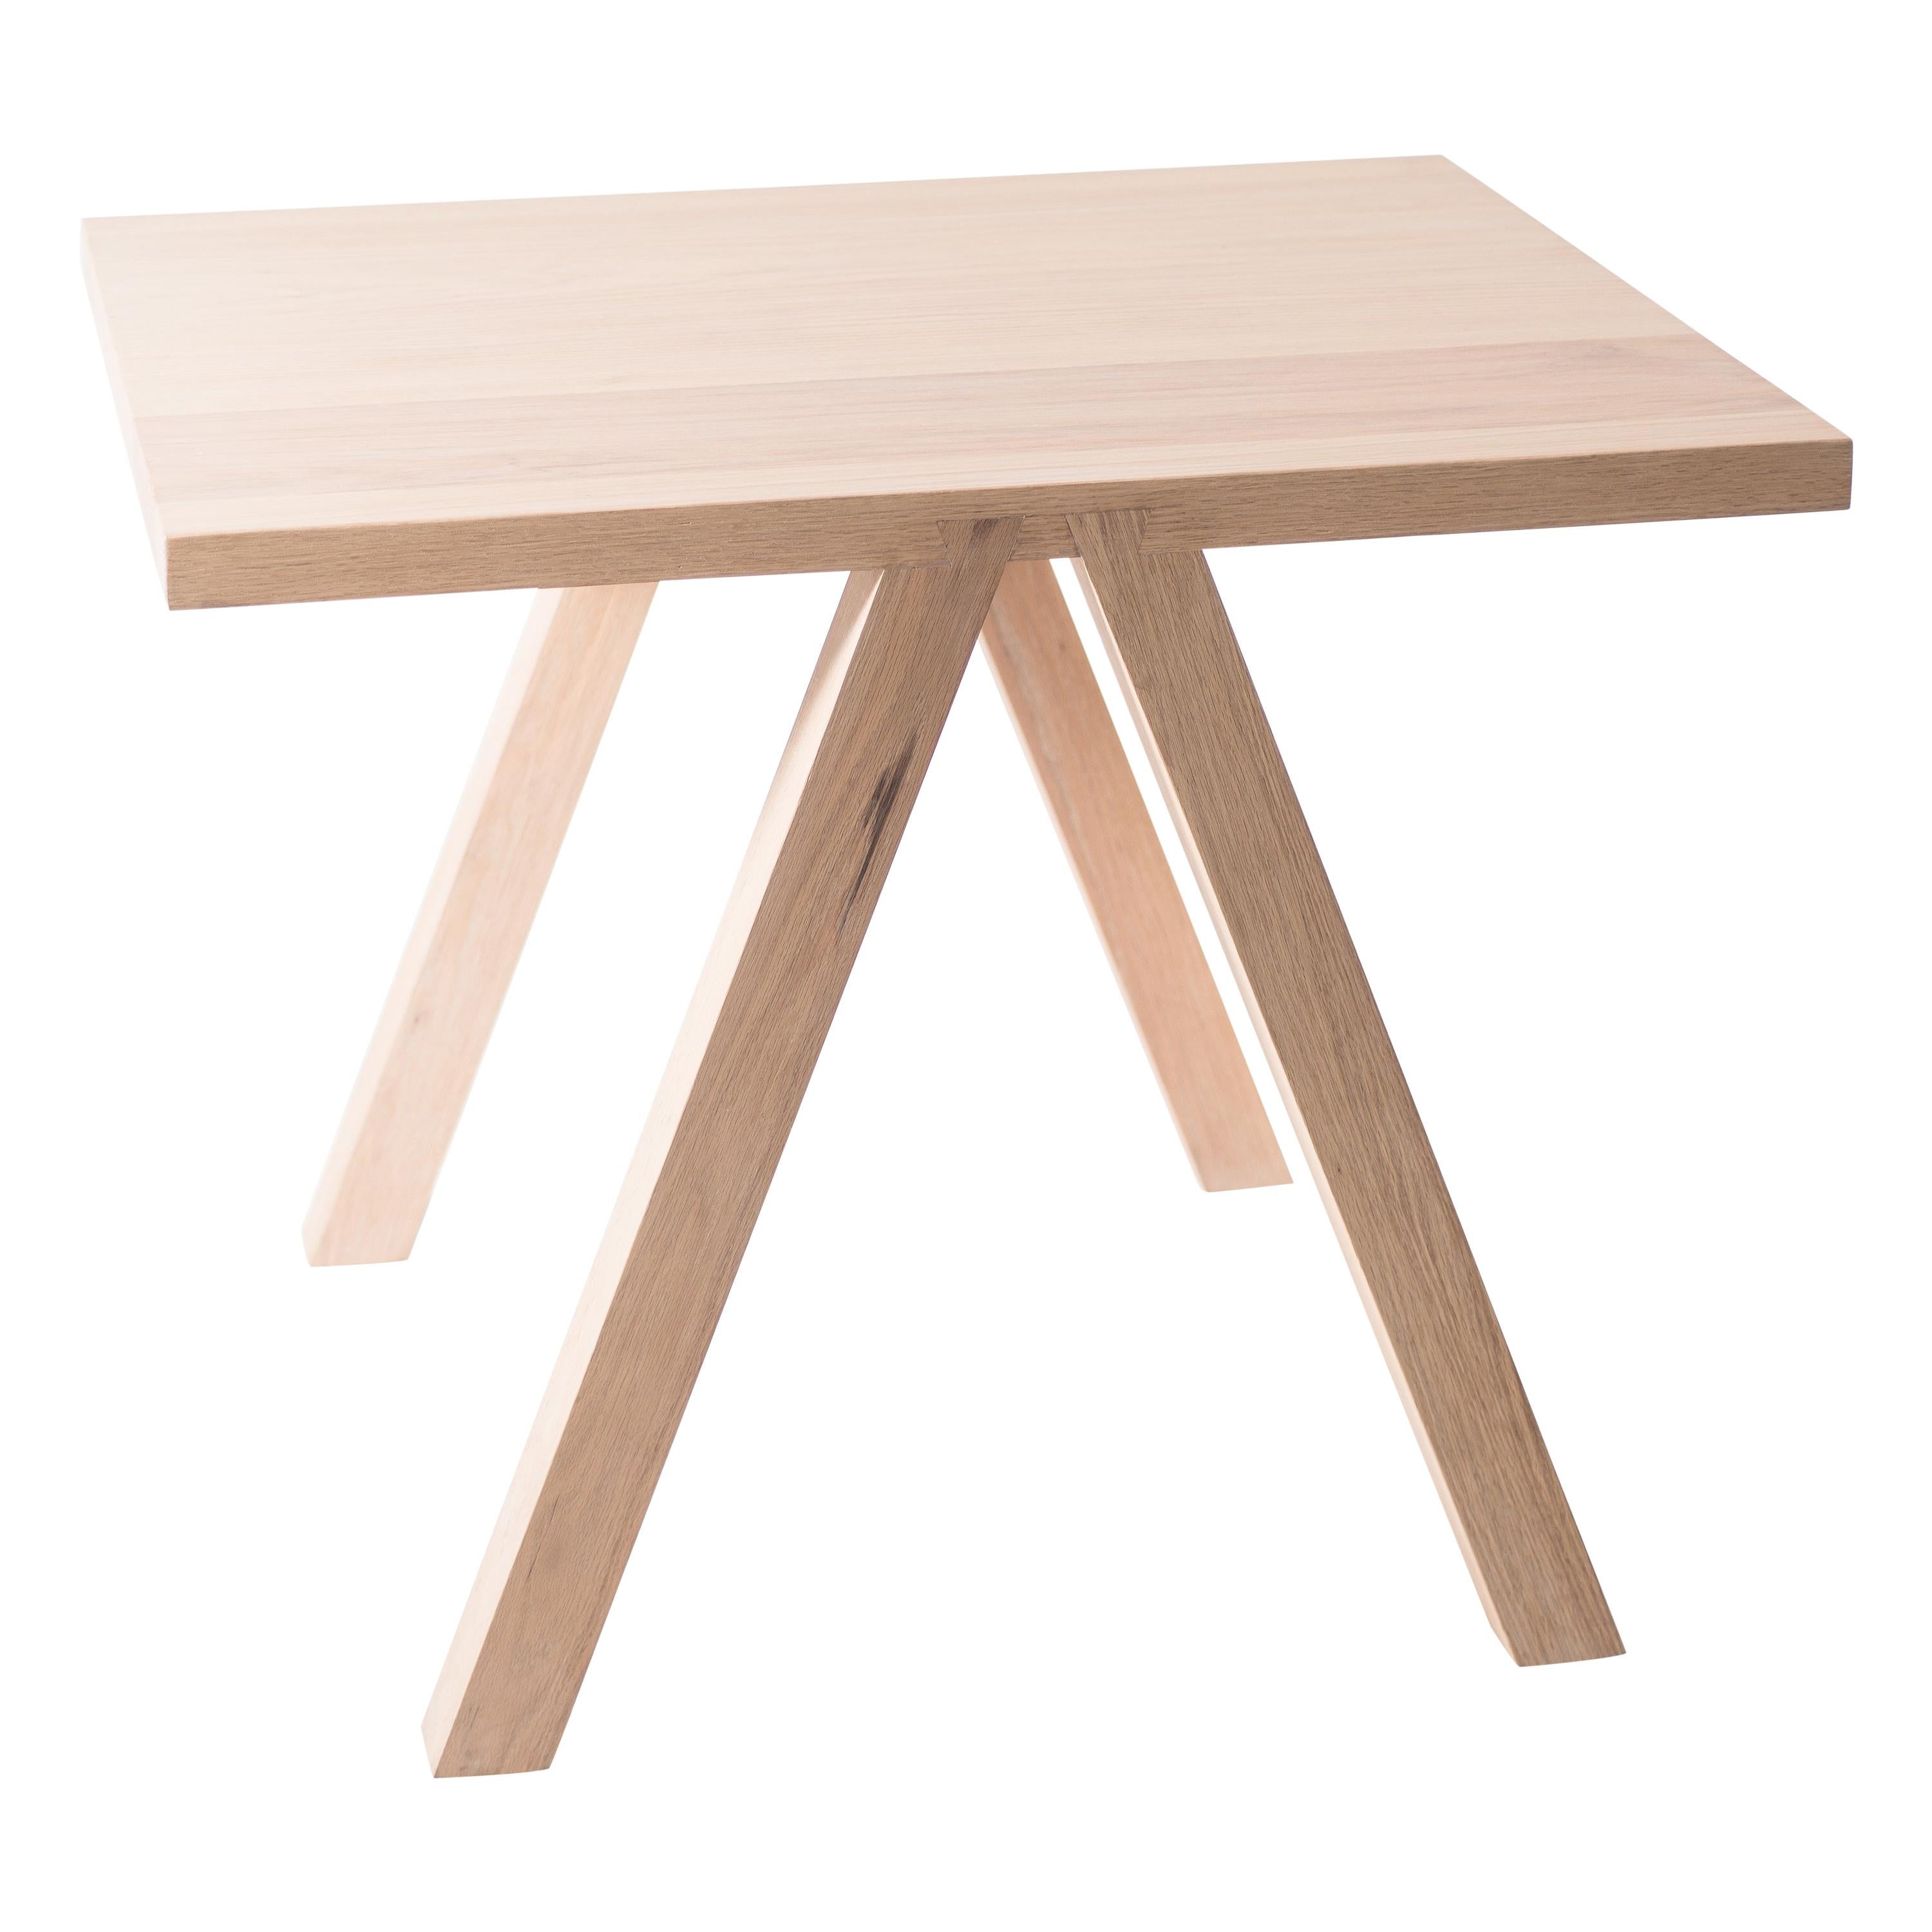 White Oak Dining Table Two Top GH